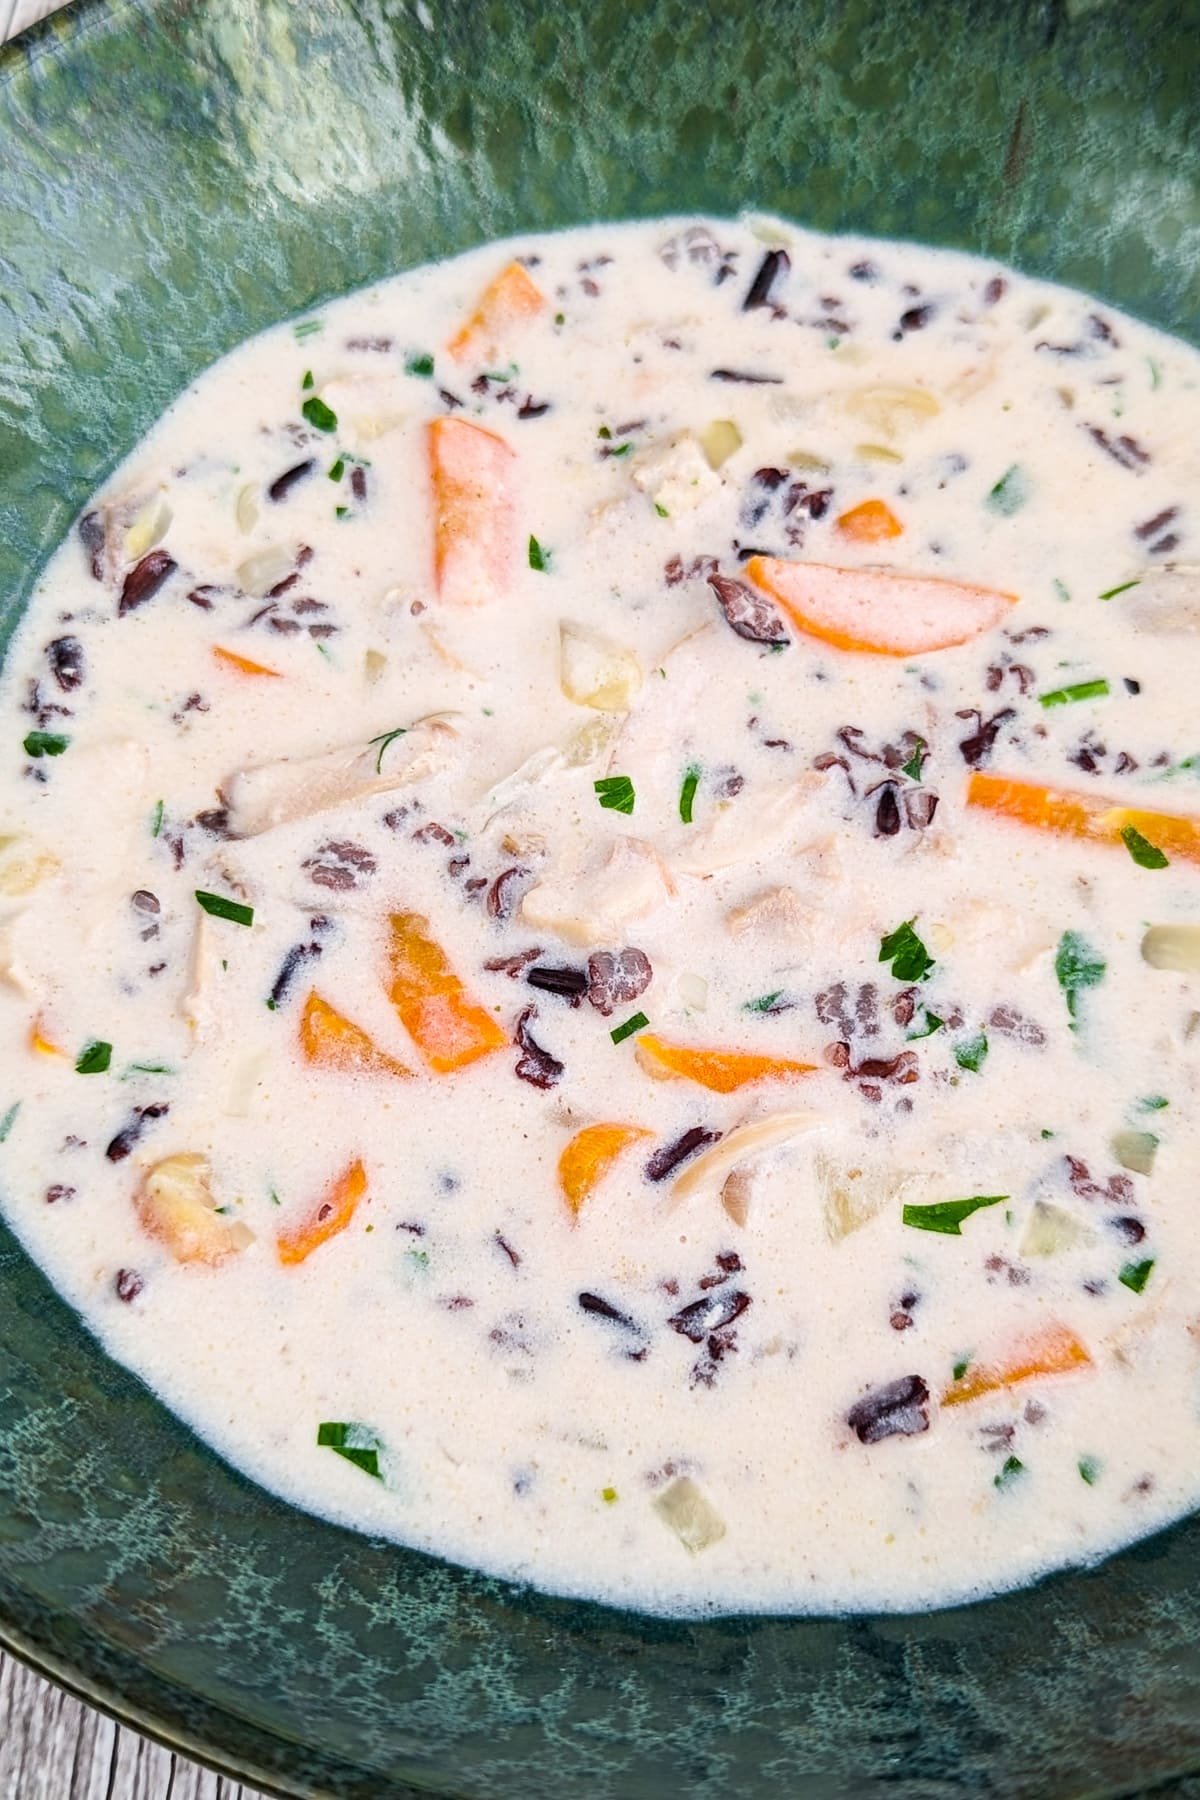 Wild rice soup with carrot and cream in a vintage green plate.